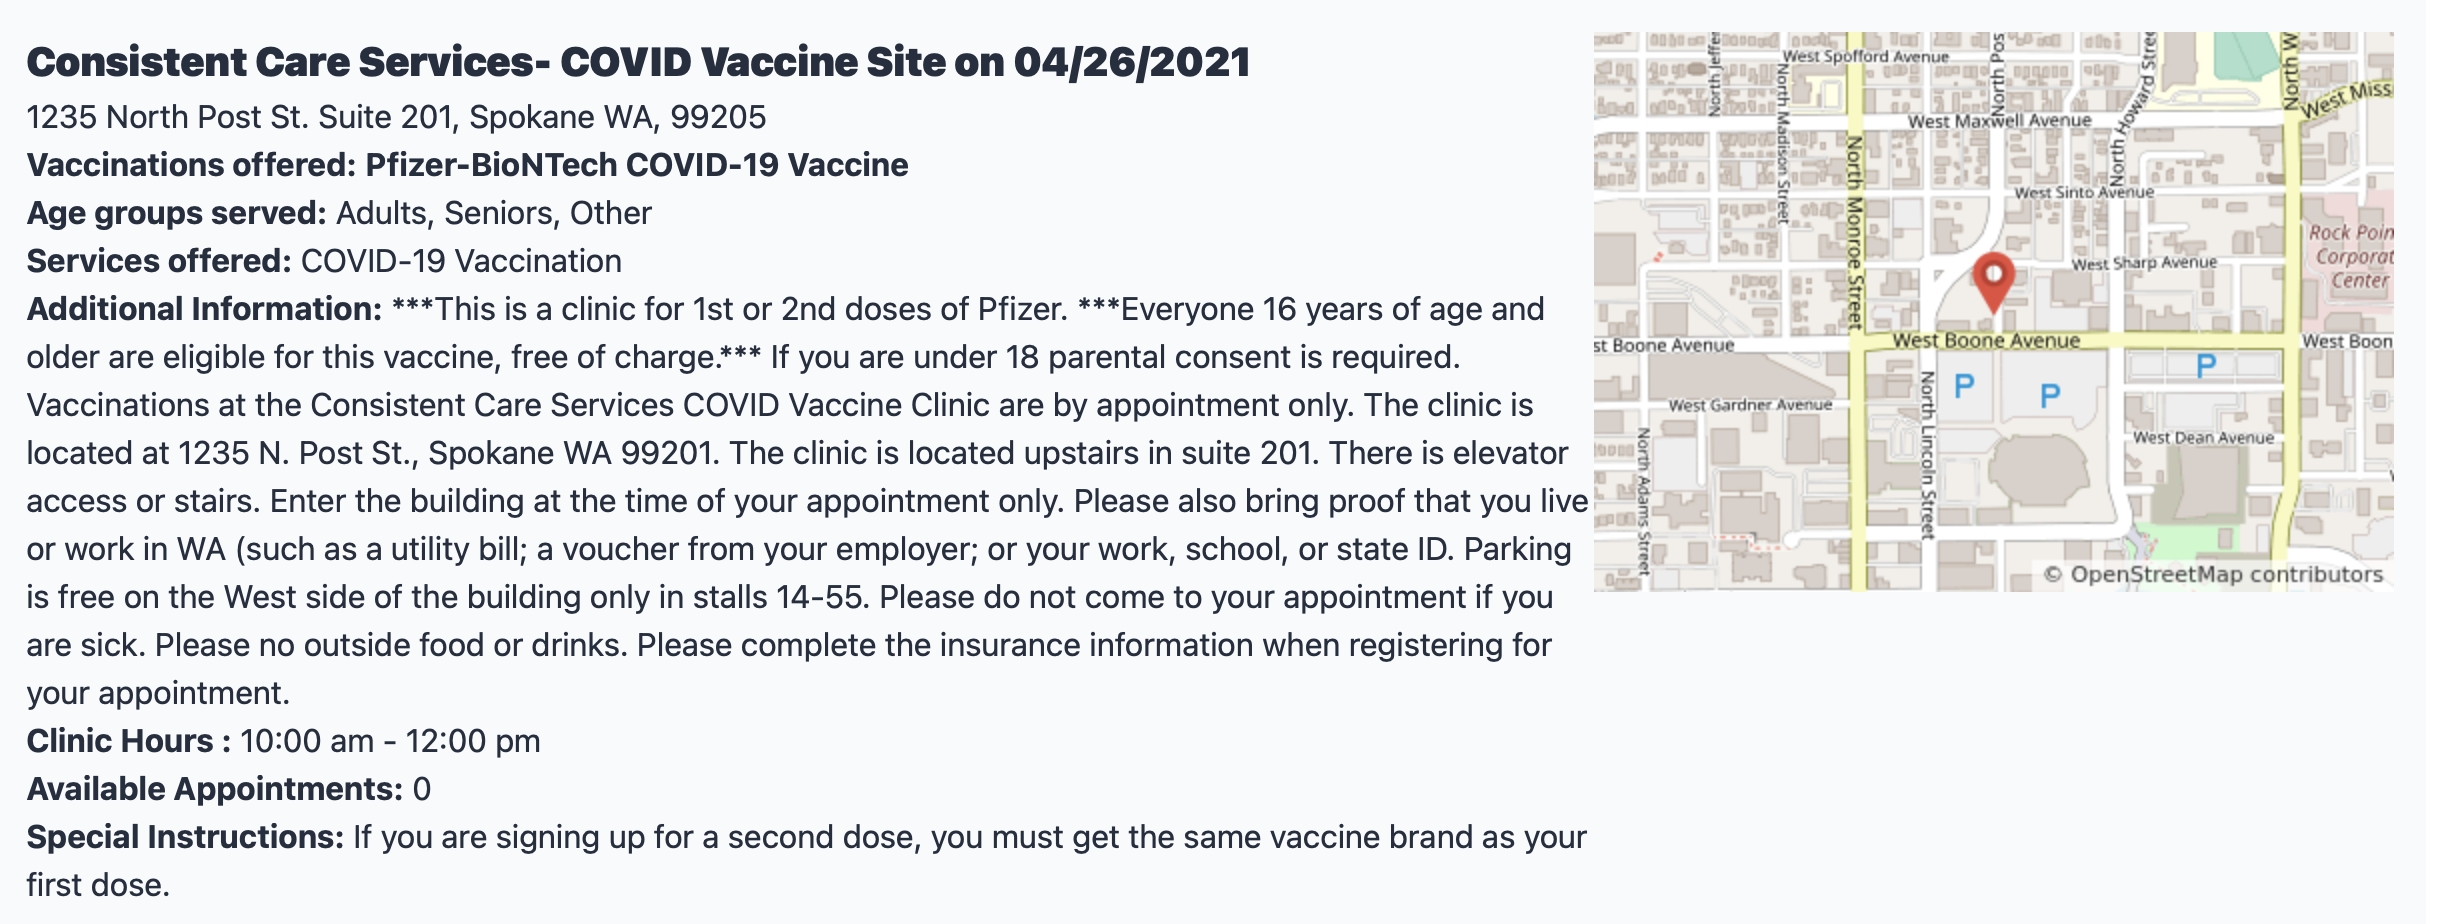 Why I created a vaccine finder